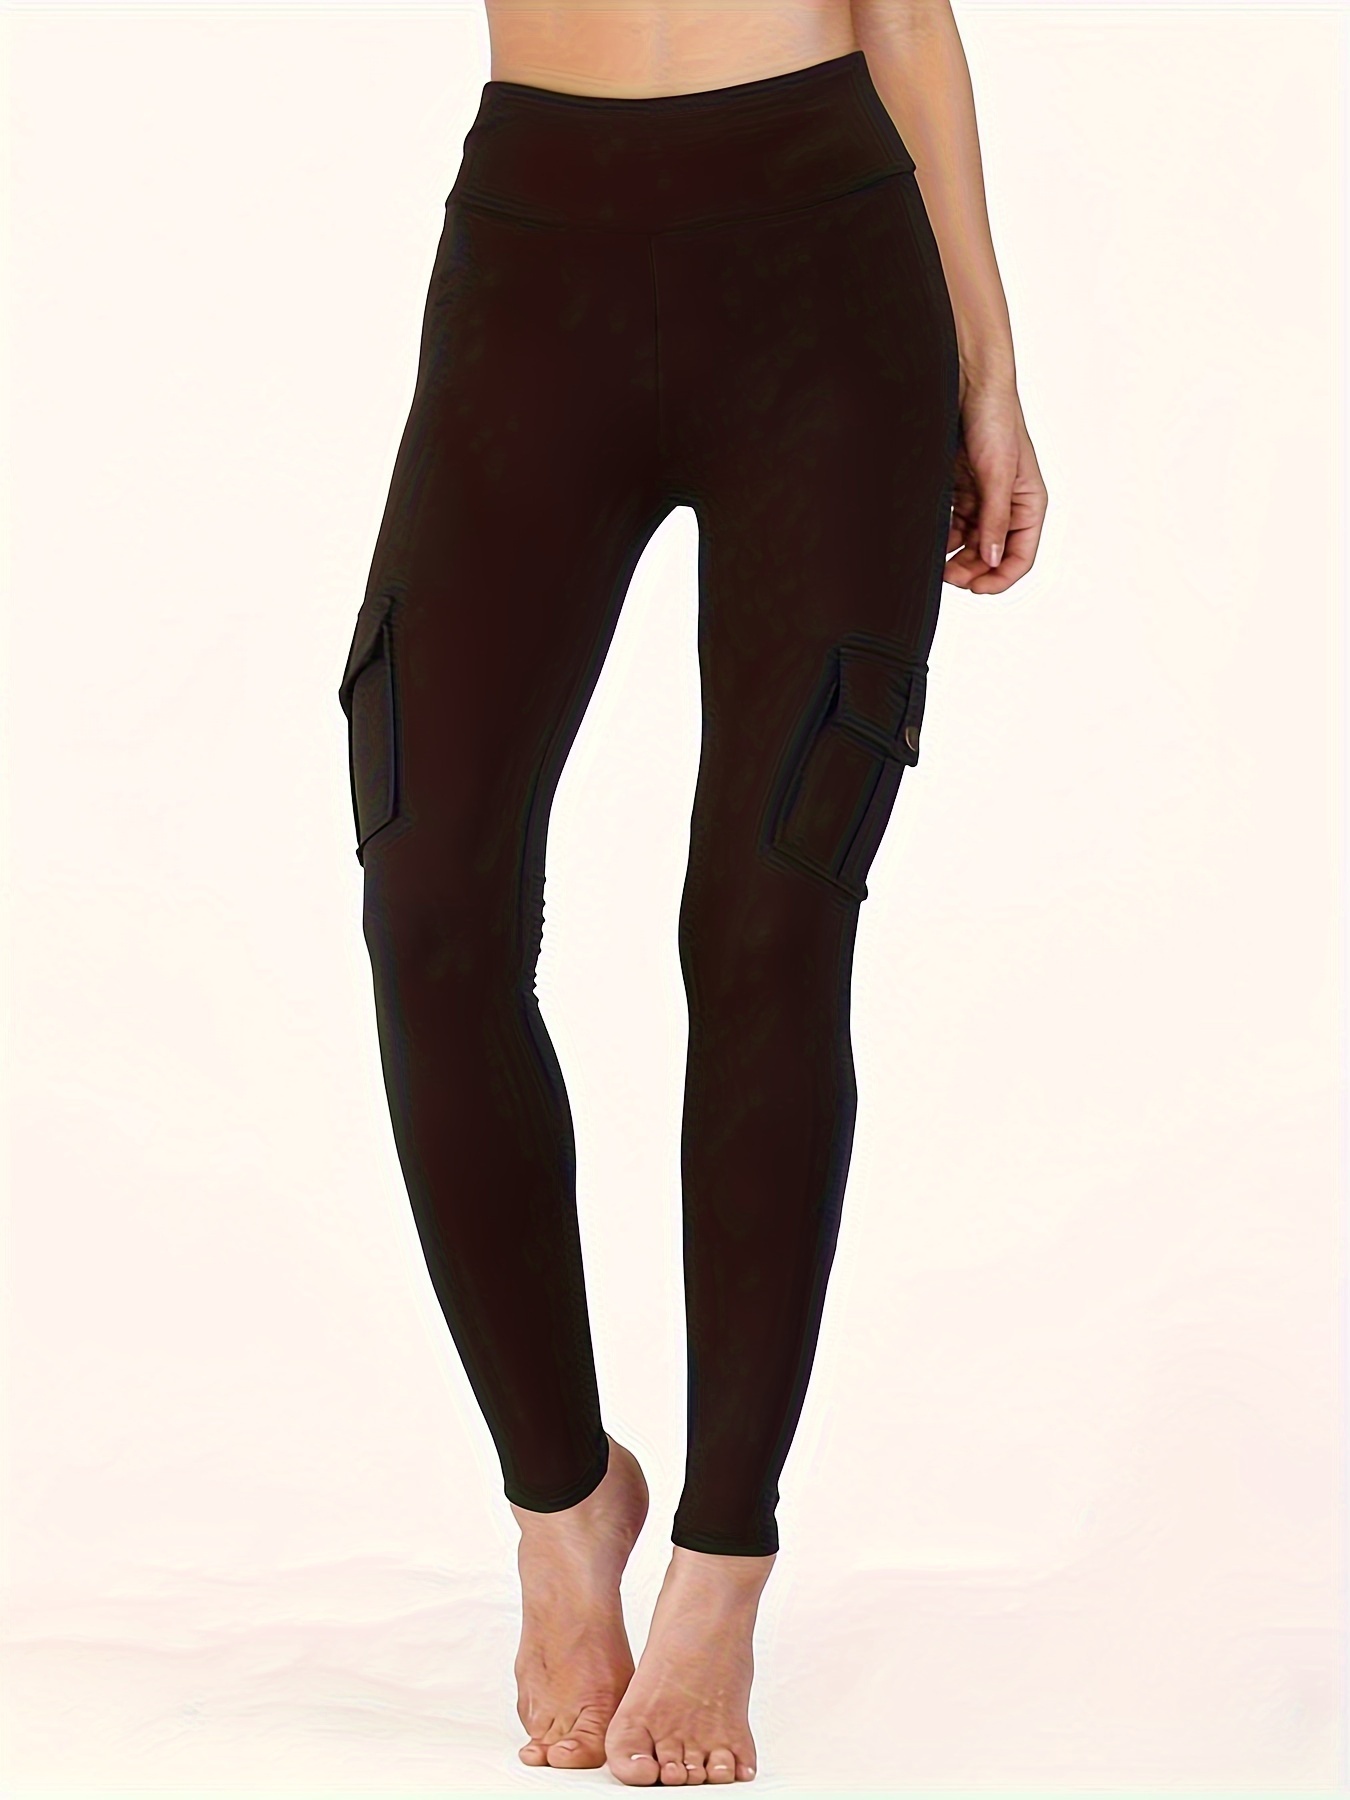 TCK-23 Black Leggings (Small-3XL) – The Crafted Keep